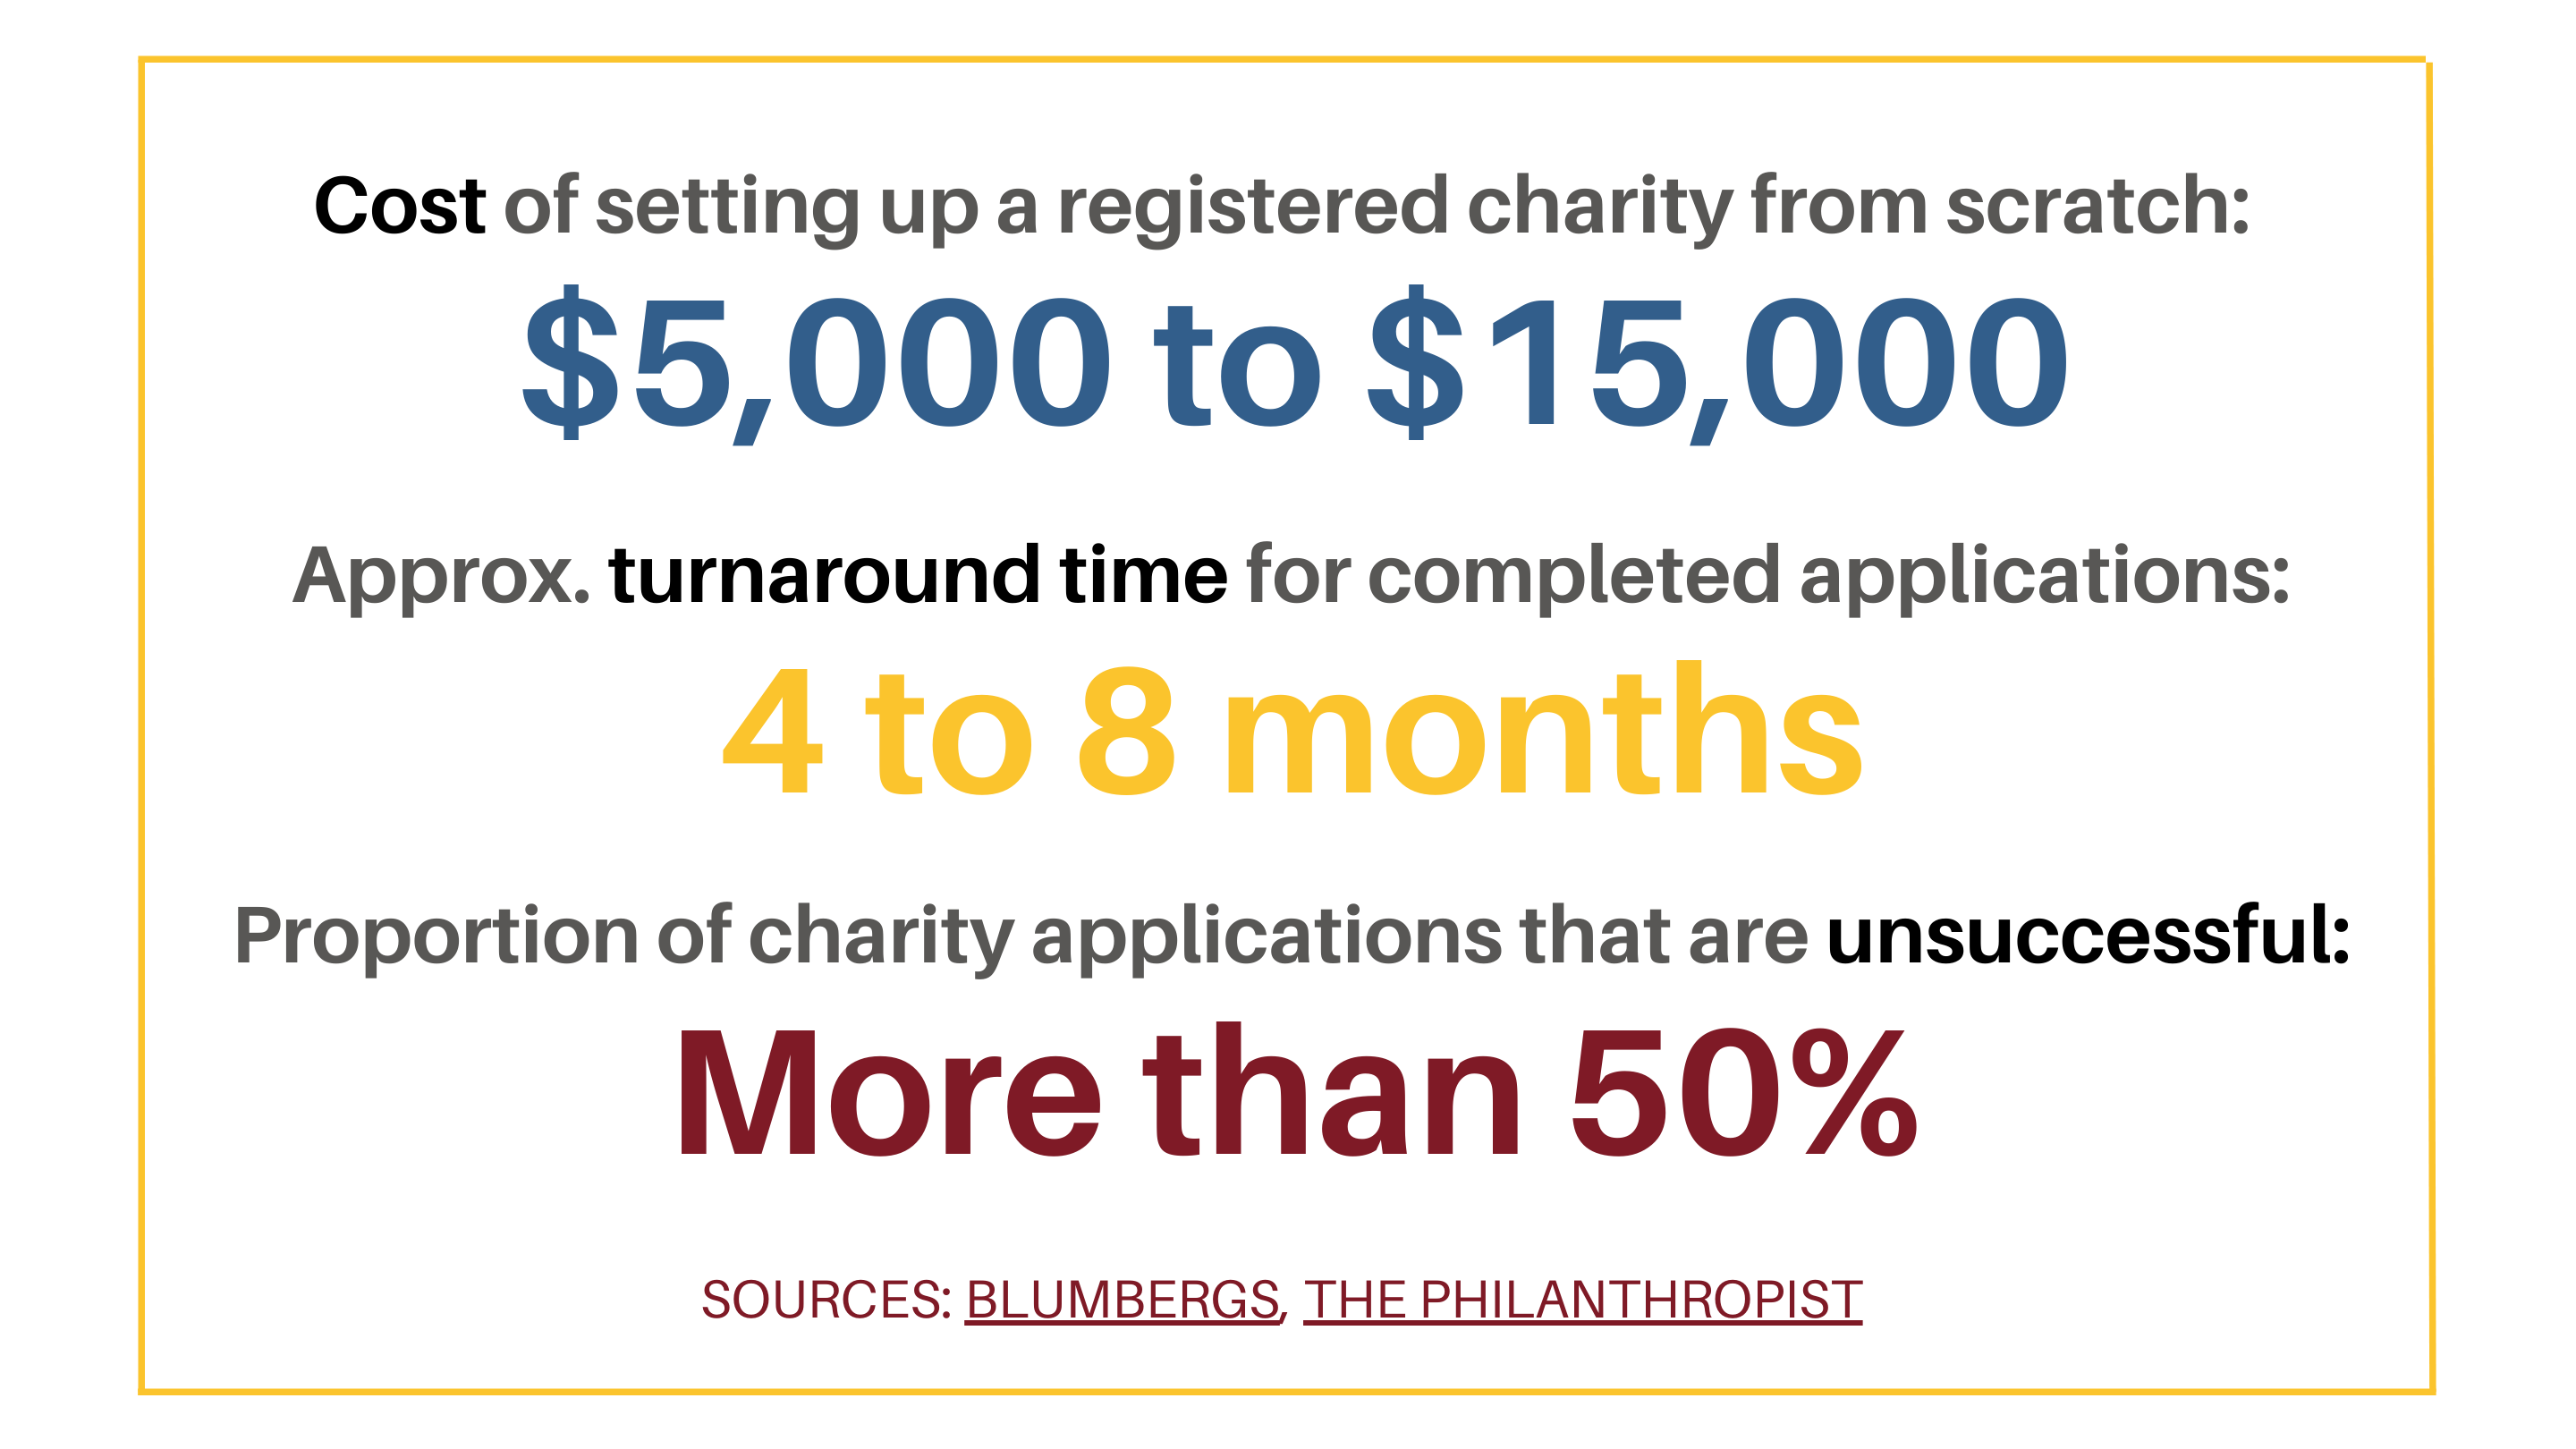 Cost of setting up a registered charity from scratch: $5,000 to $15,000. Approximate turnaround time for completed applications: 4 to 8 months. Proportion of charity applications that are unsuccessful: more than 50%. Sources: Blumbergs, The Philanthropists